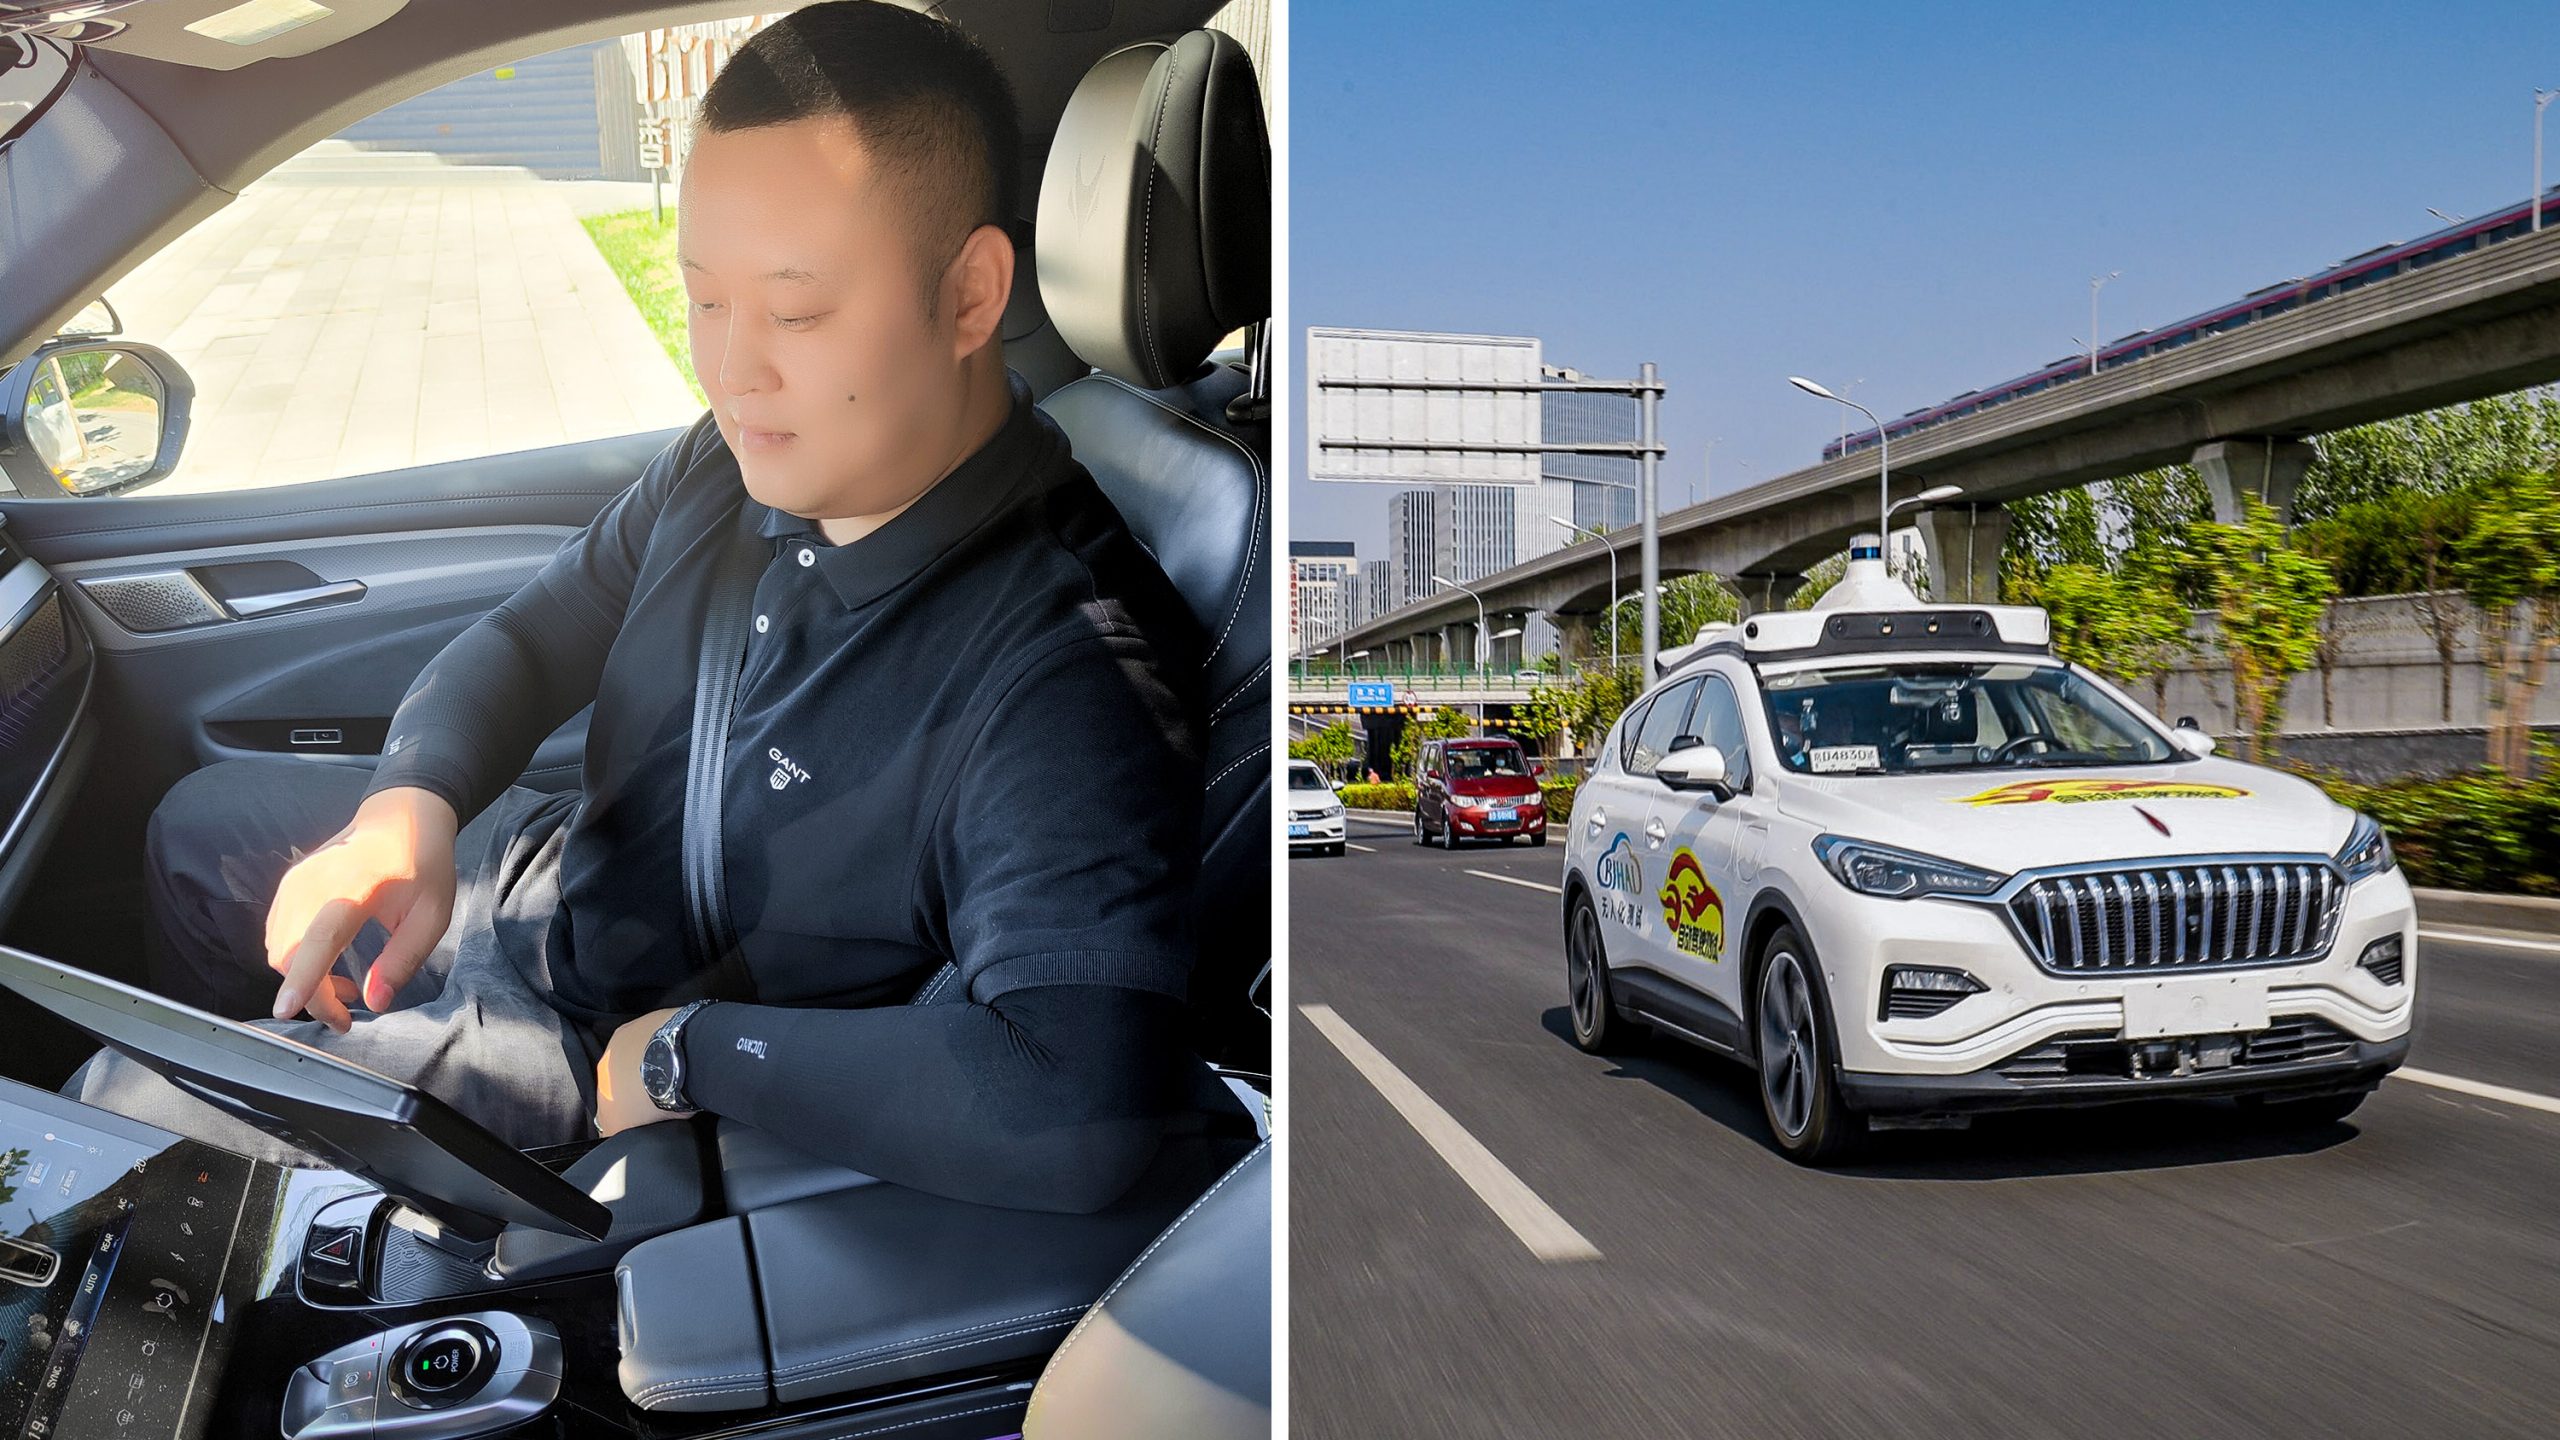 baidu worker (left) and autonomous vehicle driving on highway (right)